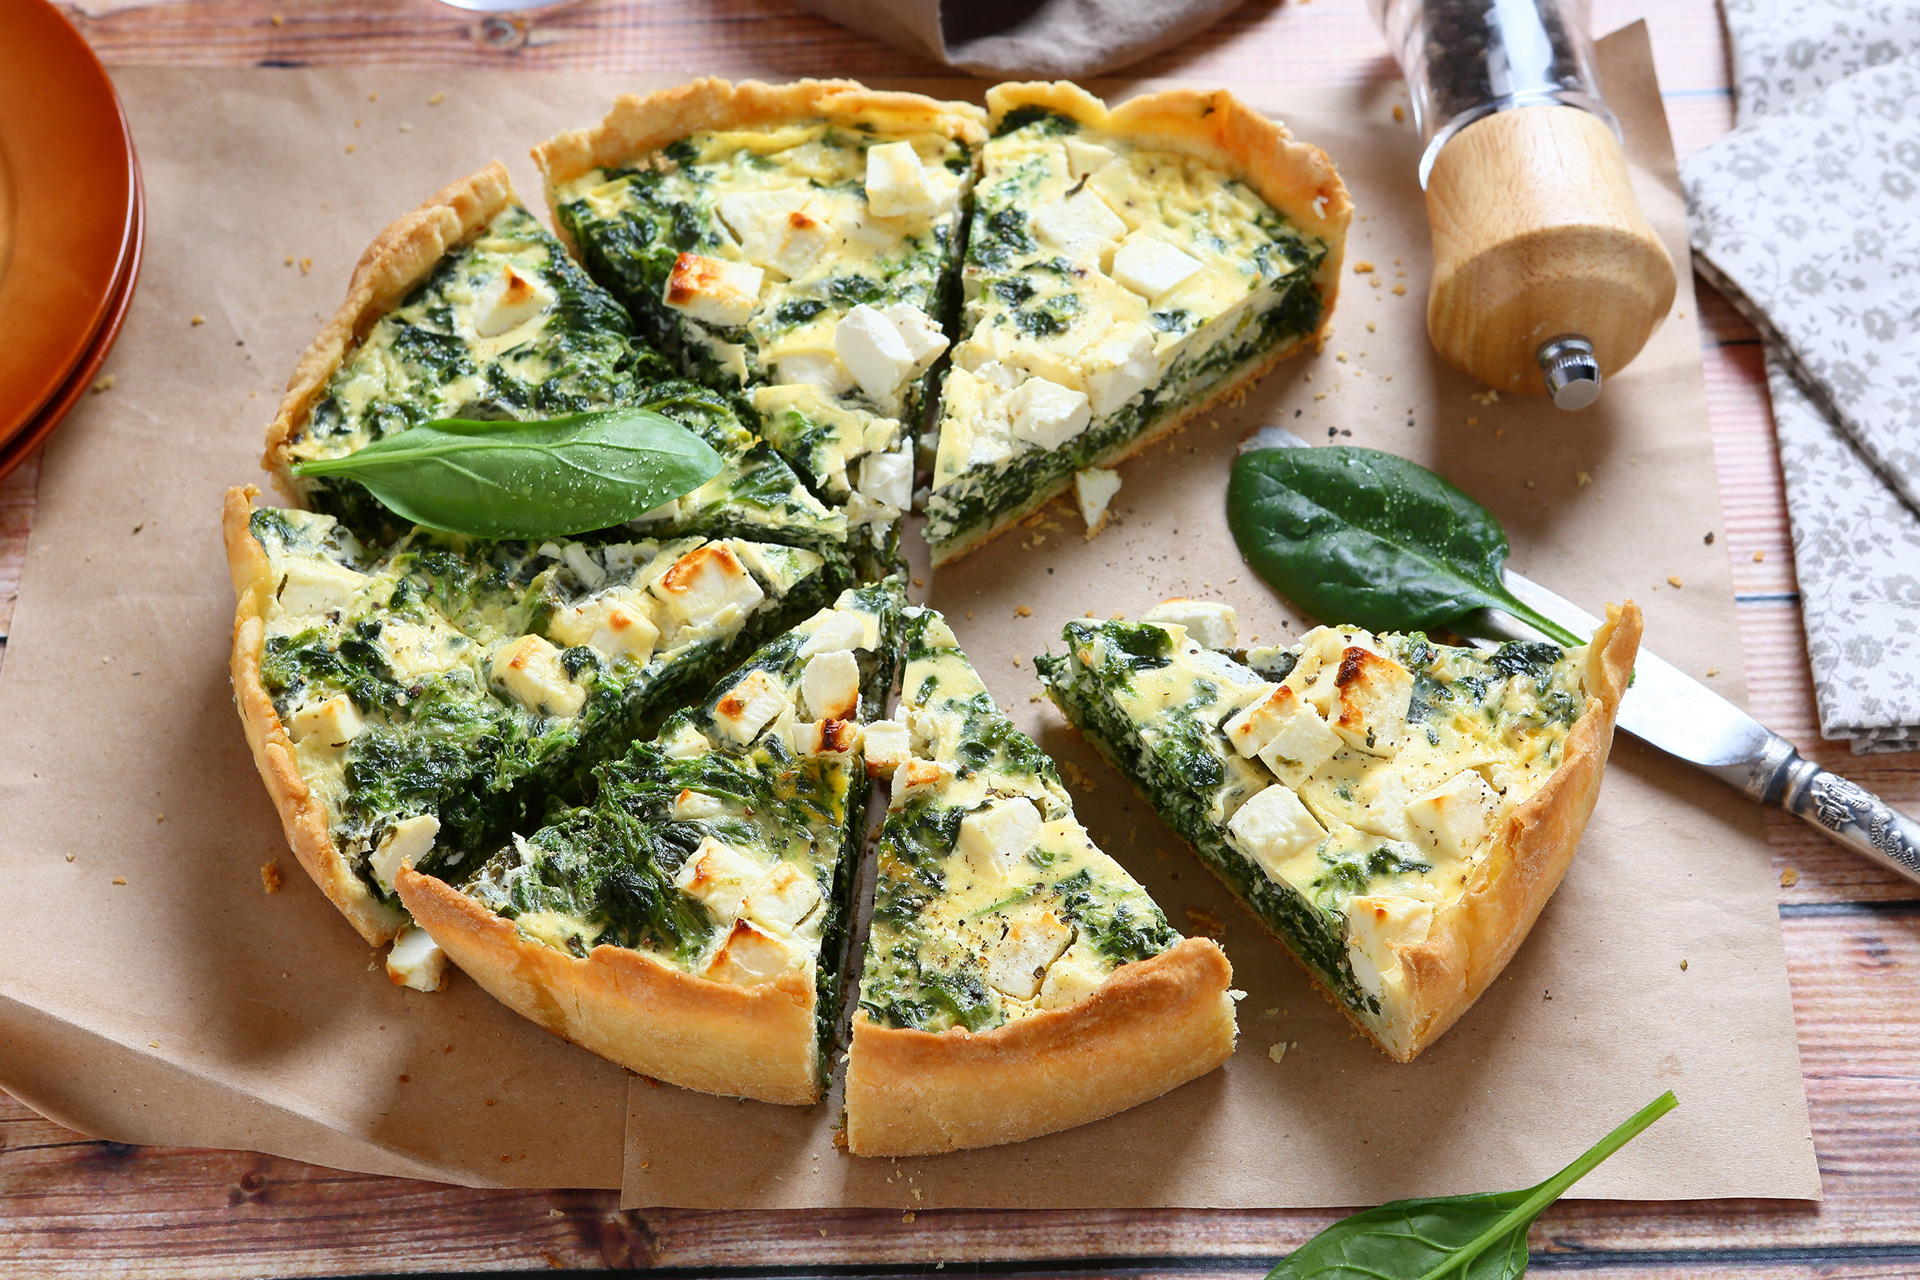 A Vegetarian Quiche Is This Year’s Coronation Dish